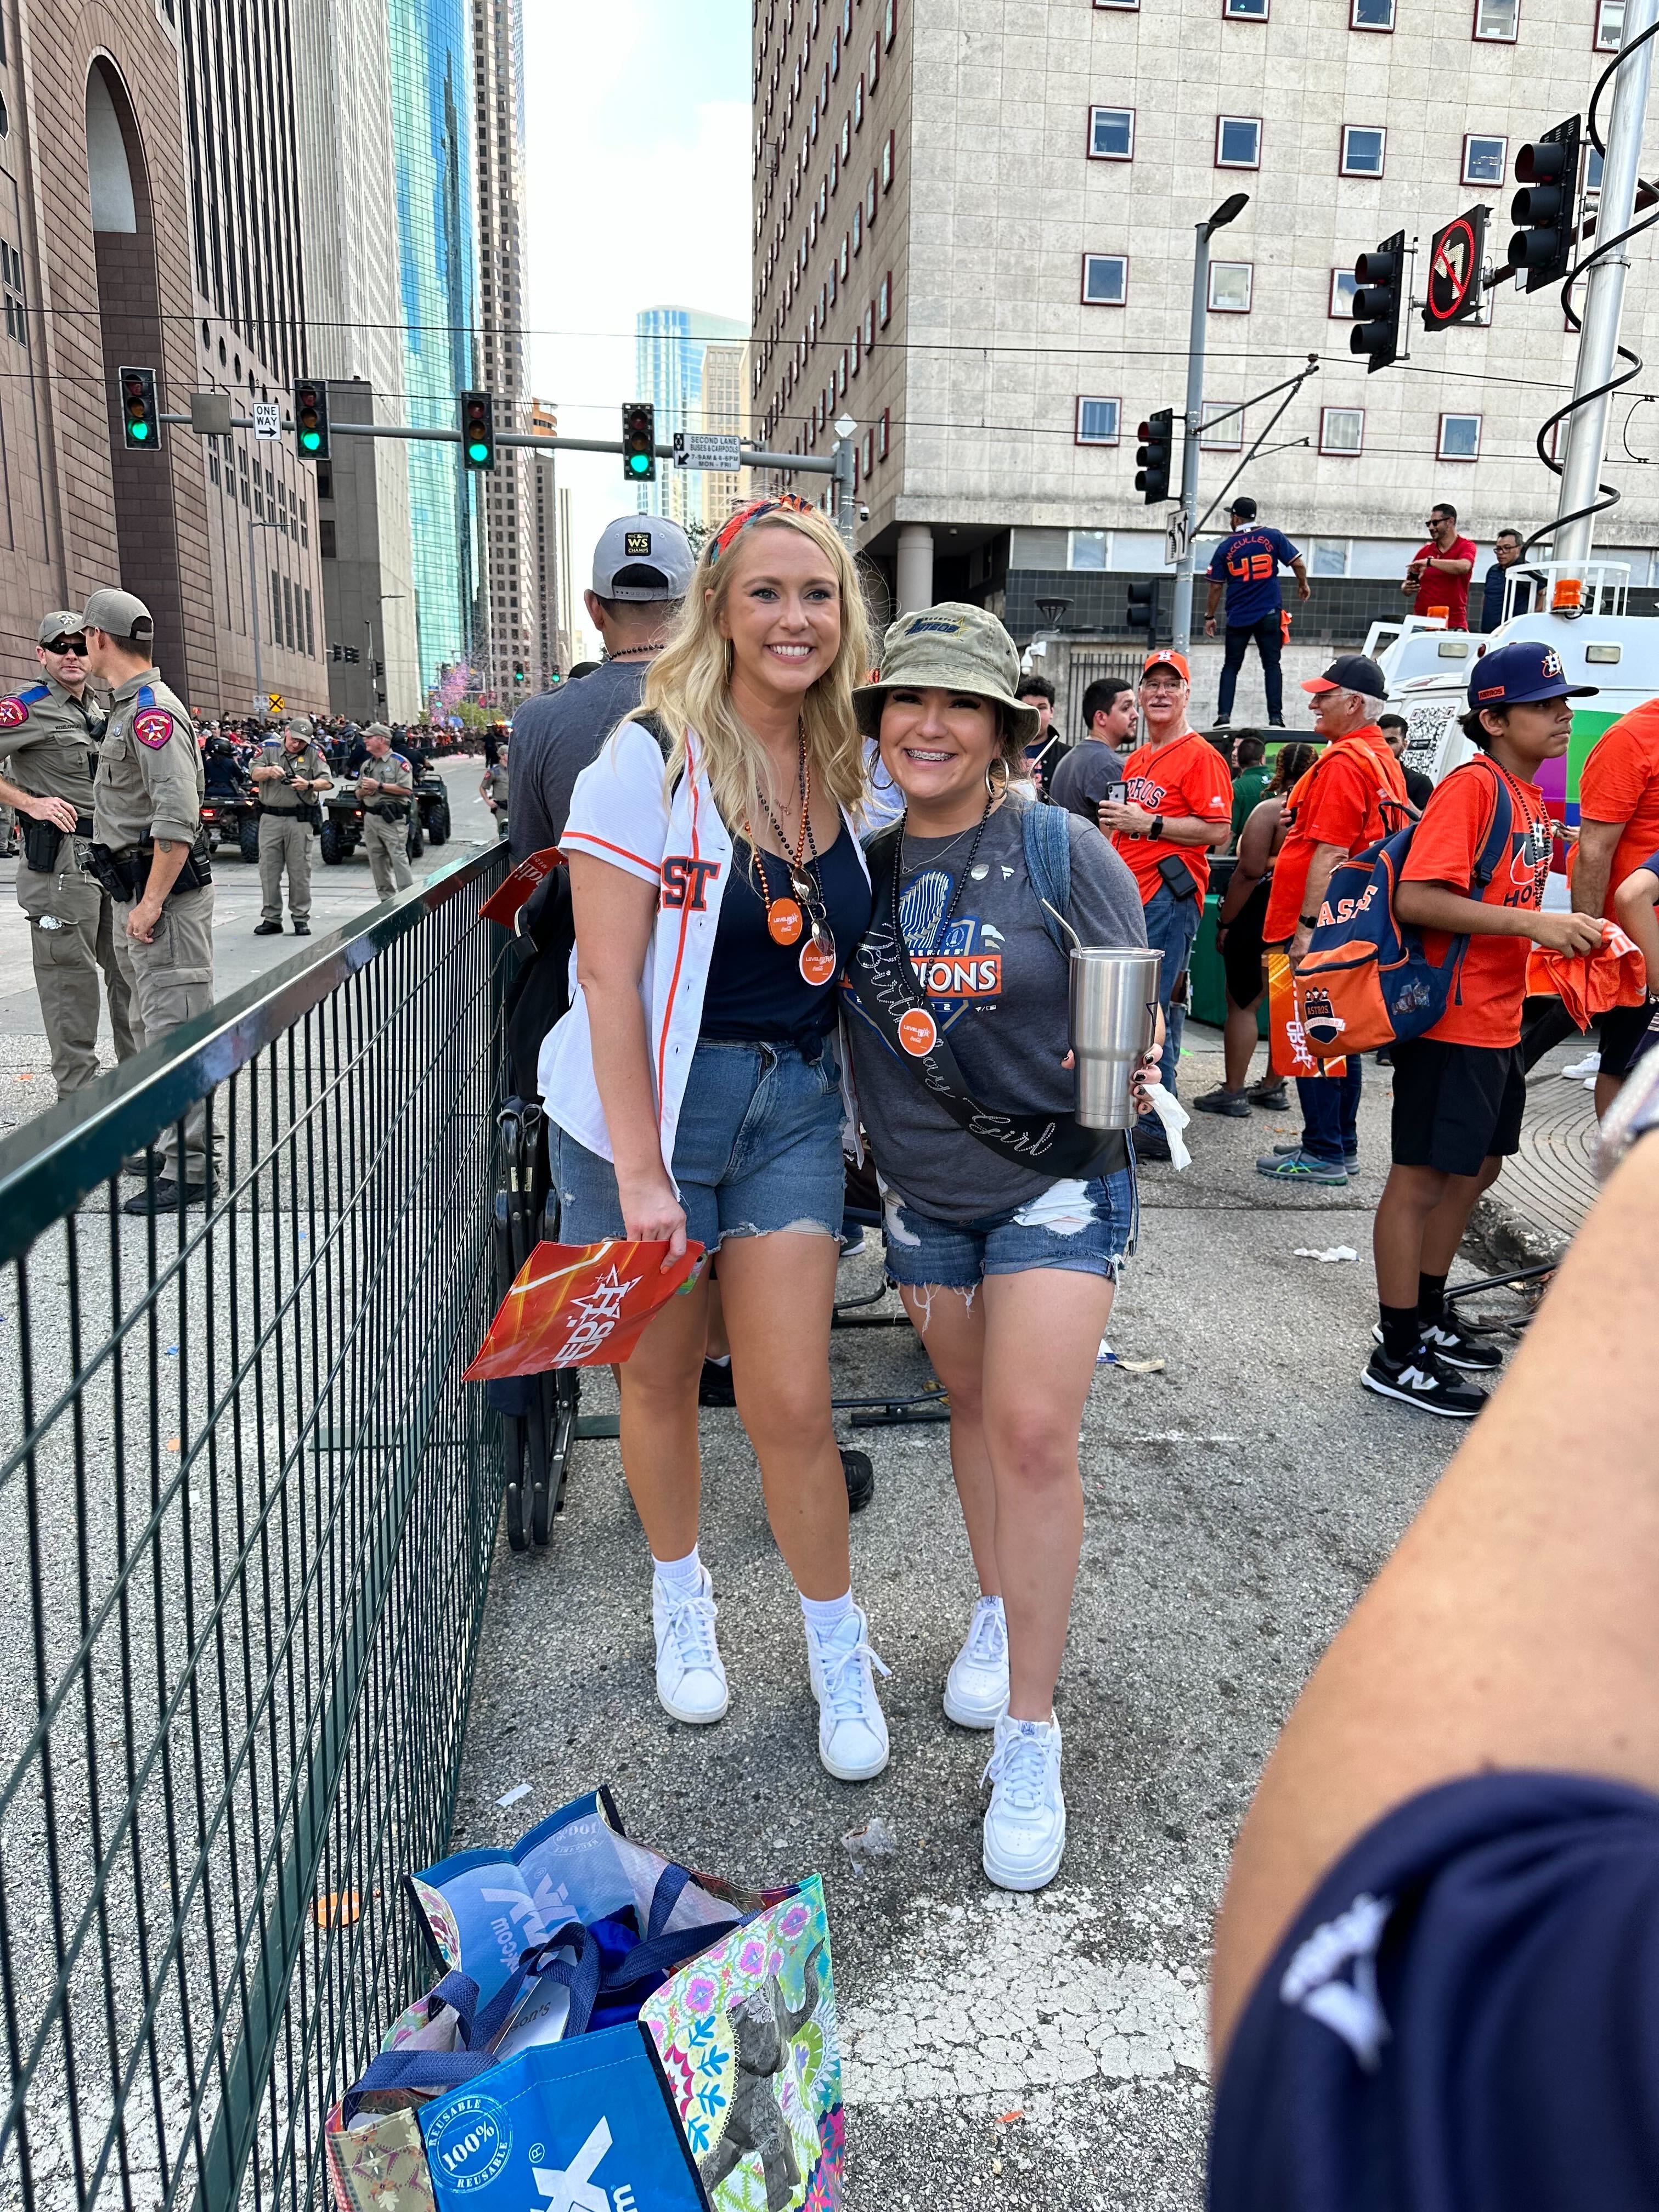 FAN CAM: Here's a recap of the Houston Astros World Series Parade